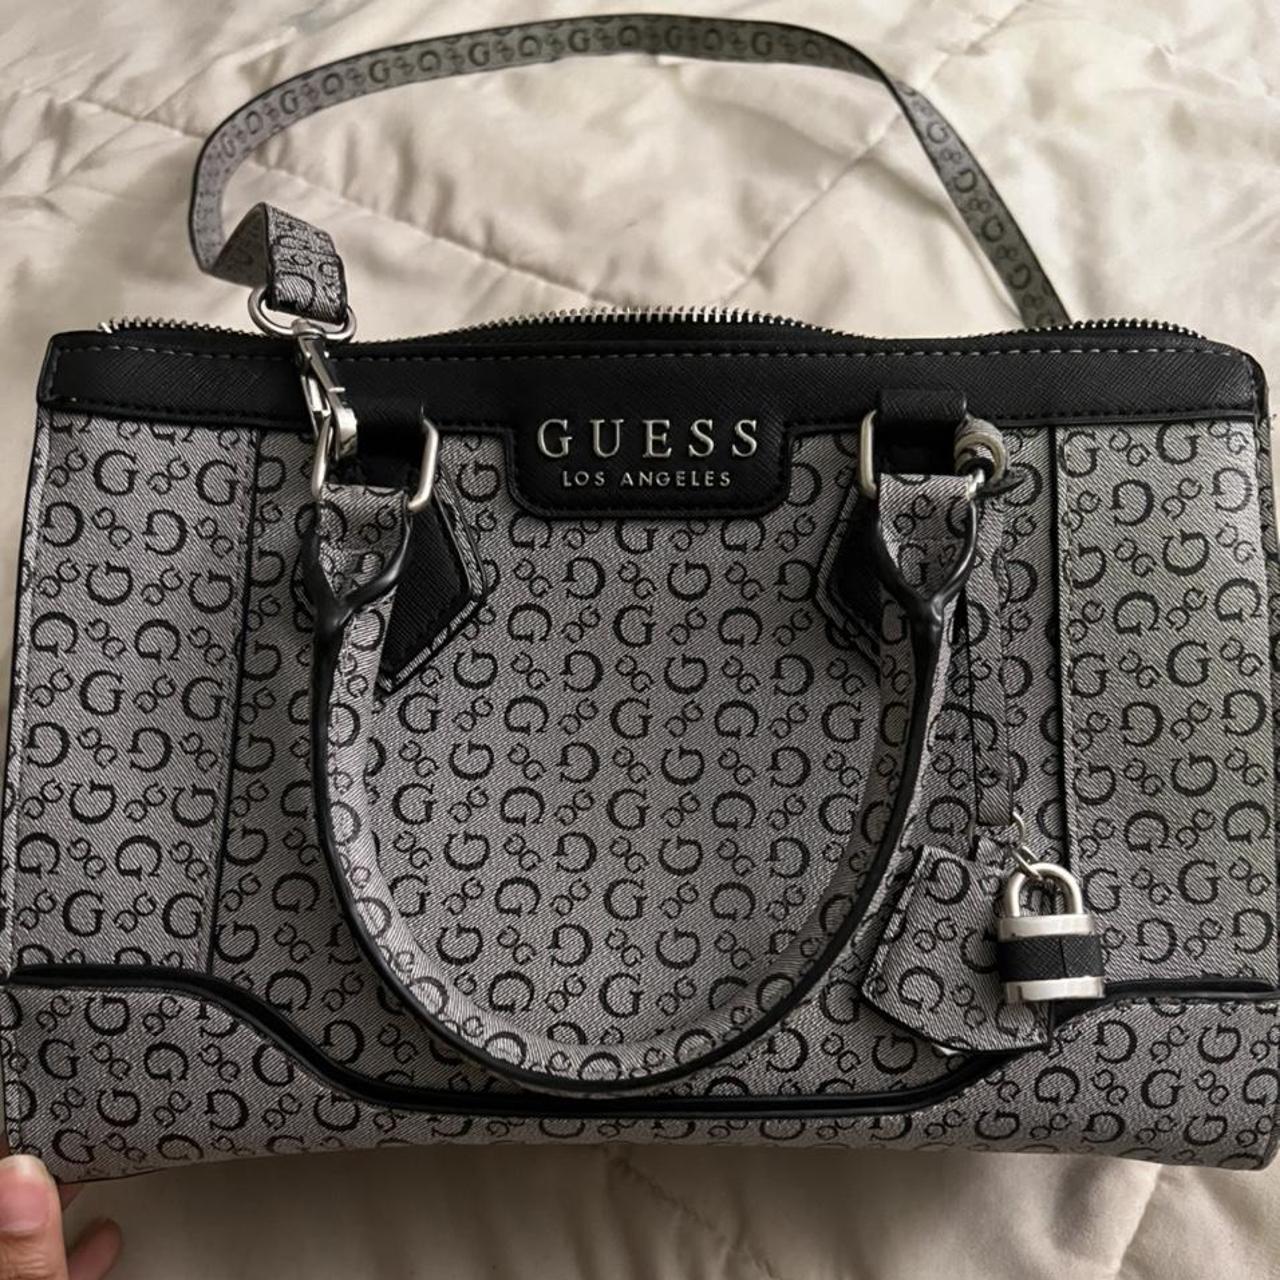 GUESS Black Colorful Bags & Handbags for Women for sale | eBay